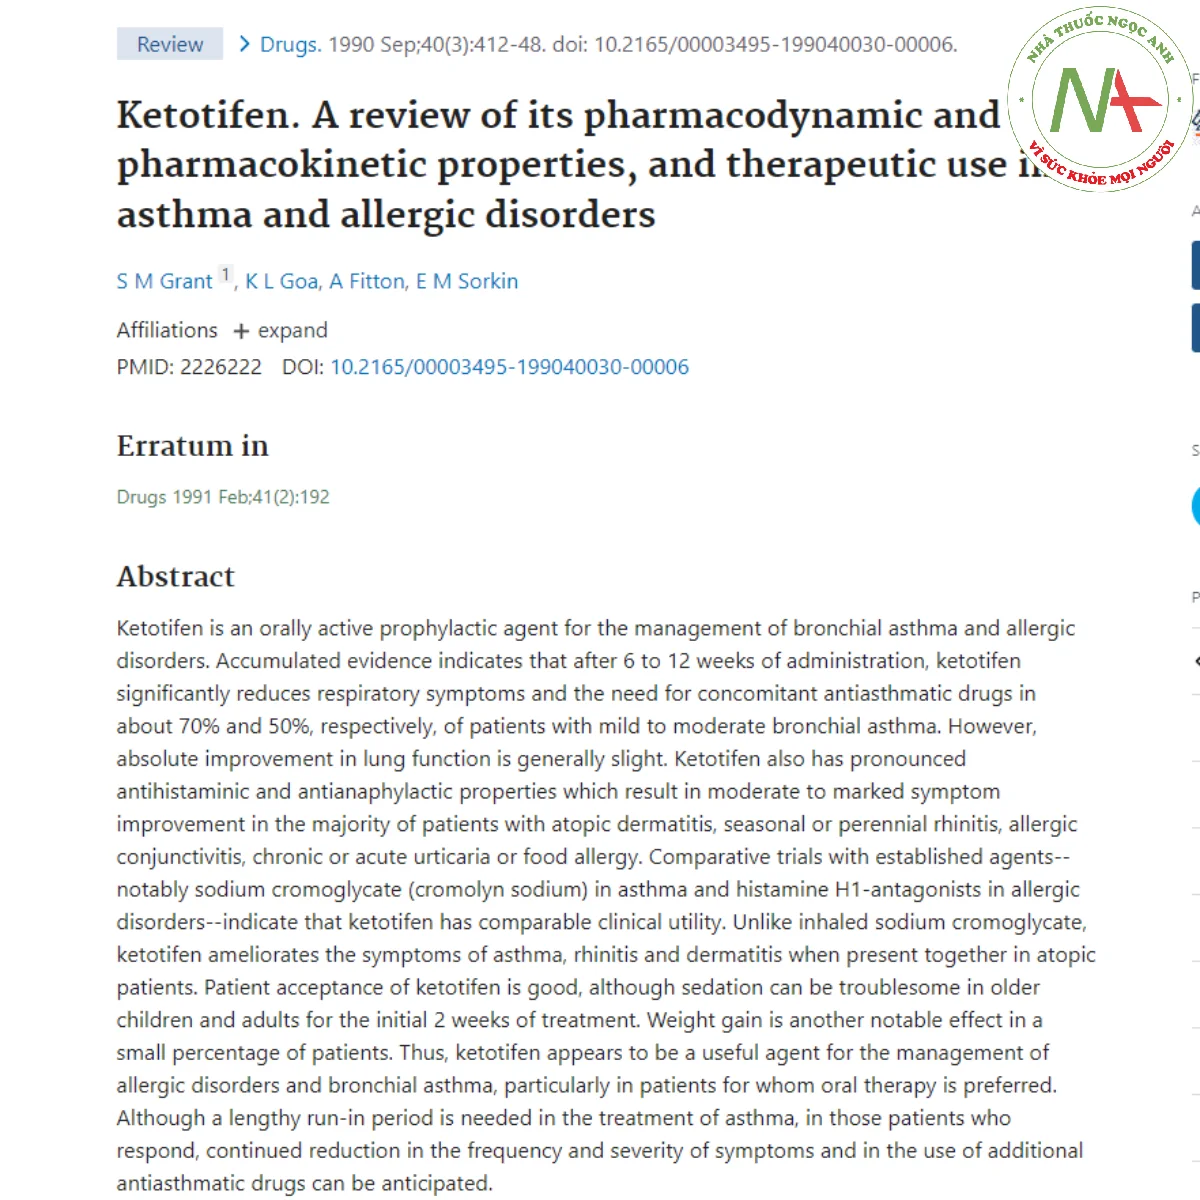 Ketotifen. A review of its pharmacodynamic and pharmacokinetic properties, and therapeutic use in asthma and allergic disorders